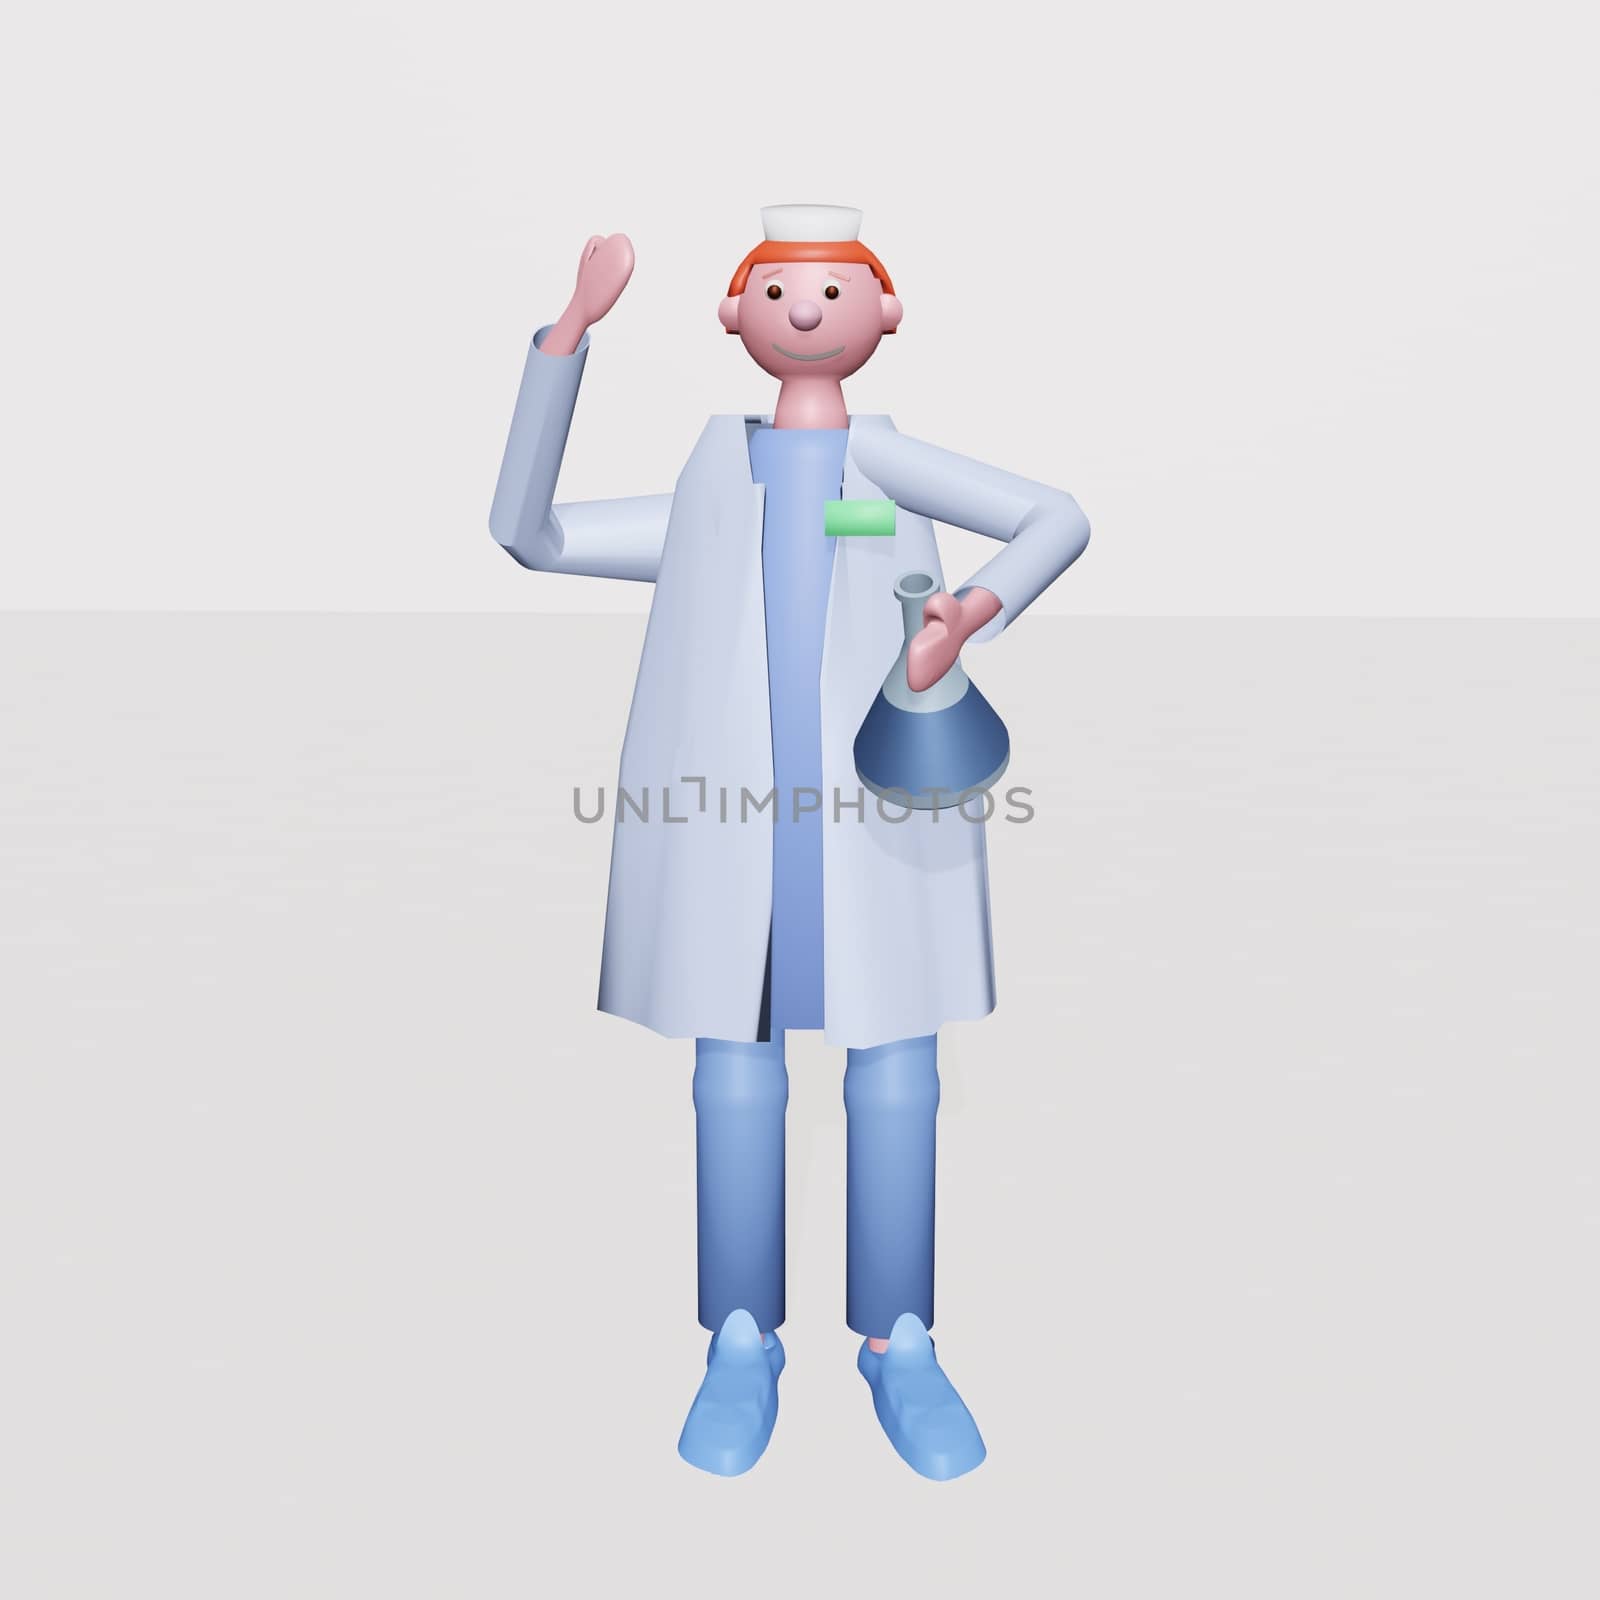 Medical scientist with a medical mask holding a glass test tube with liquid medicine or vaccine for the virus. Illustration in a cute plasticine style, 3D render volumetric view. by zaryov